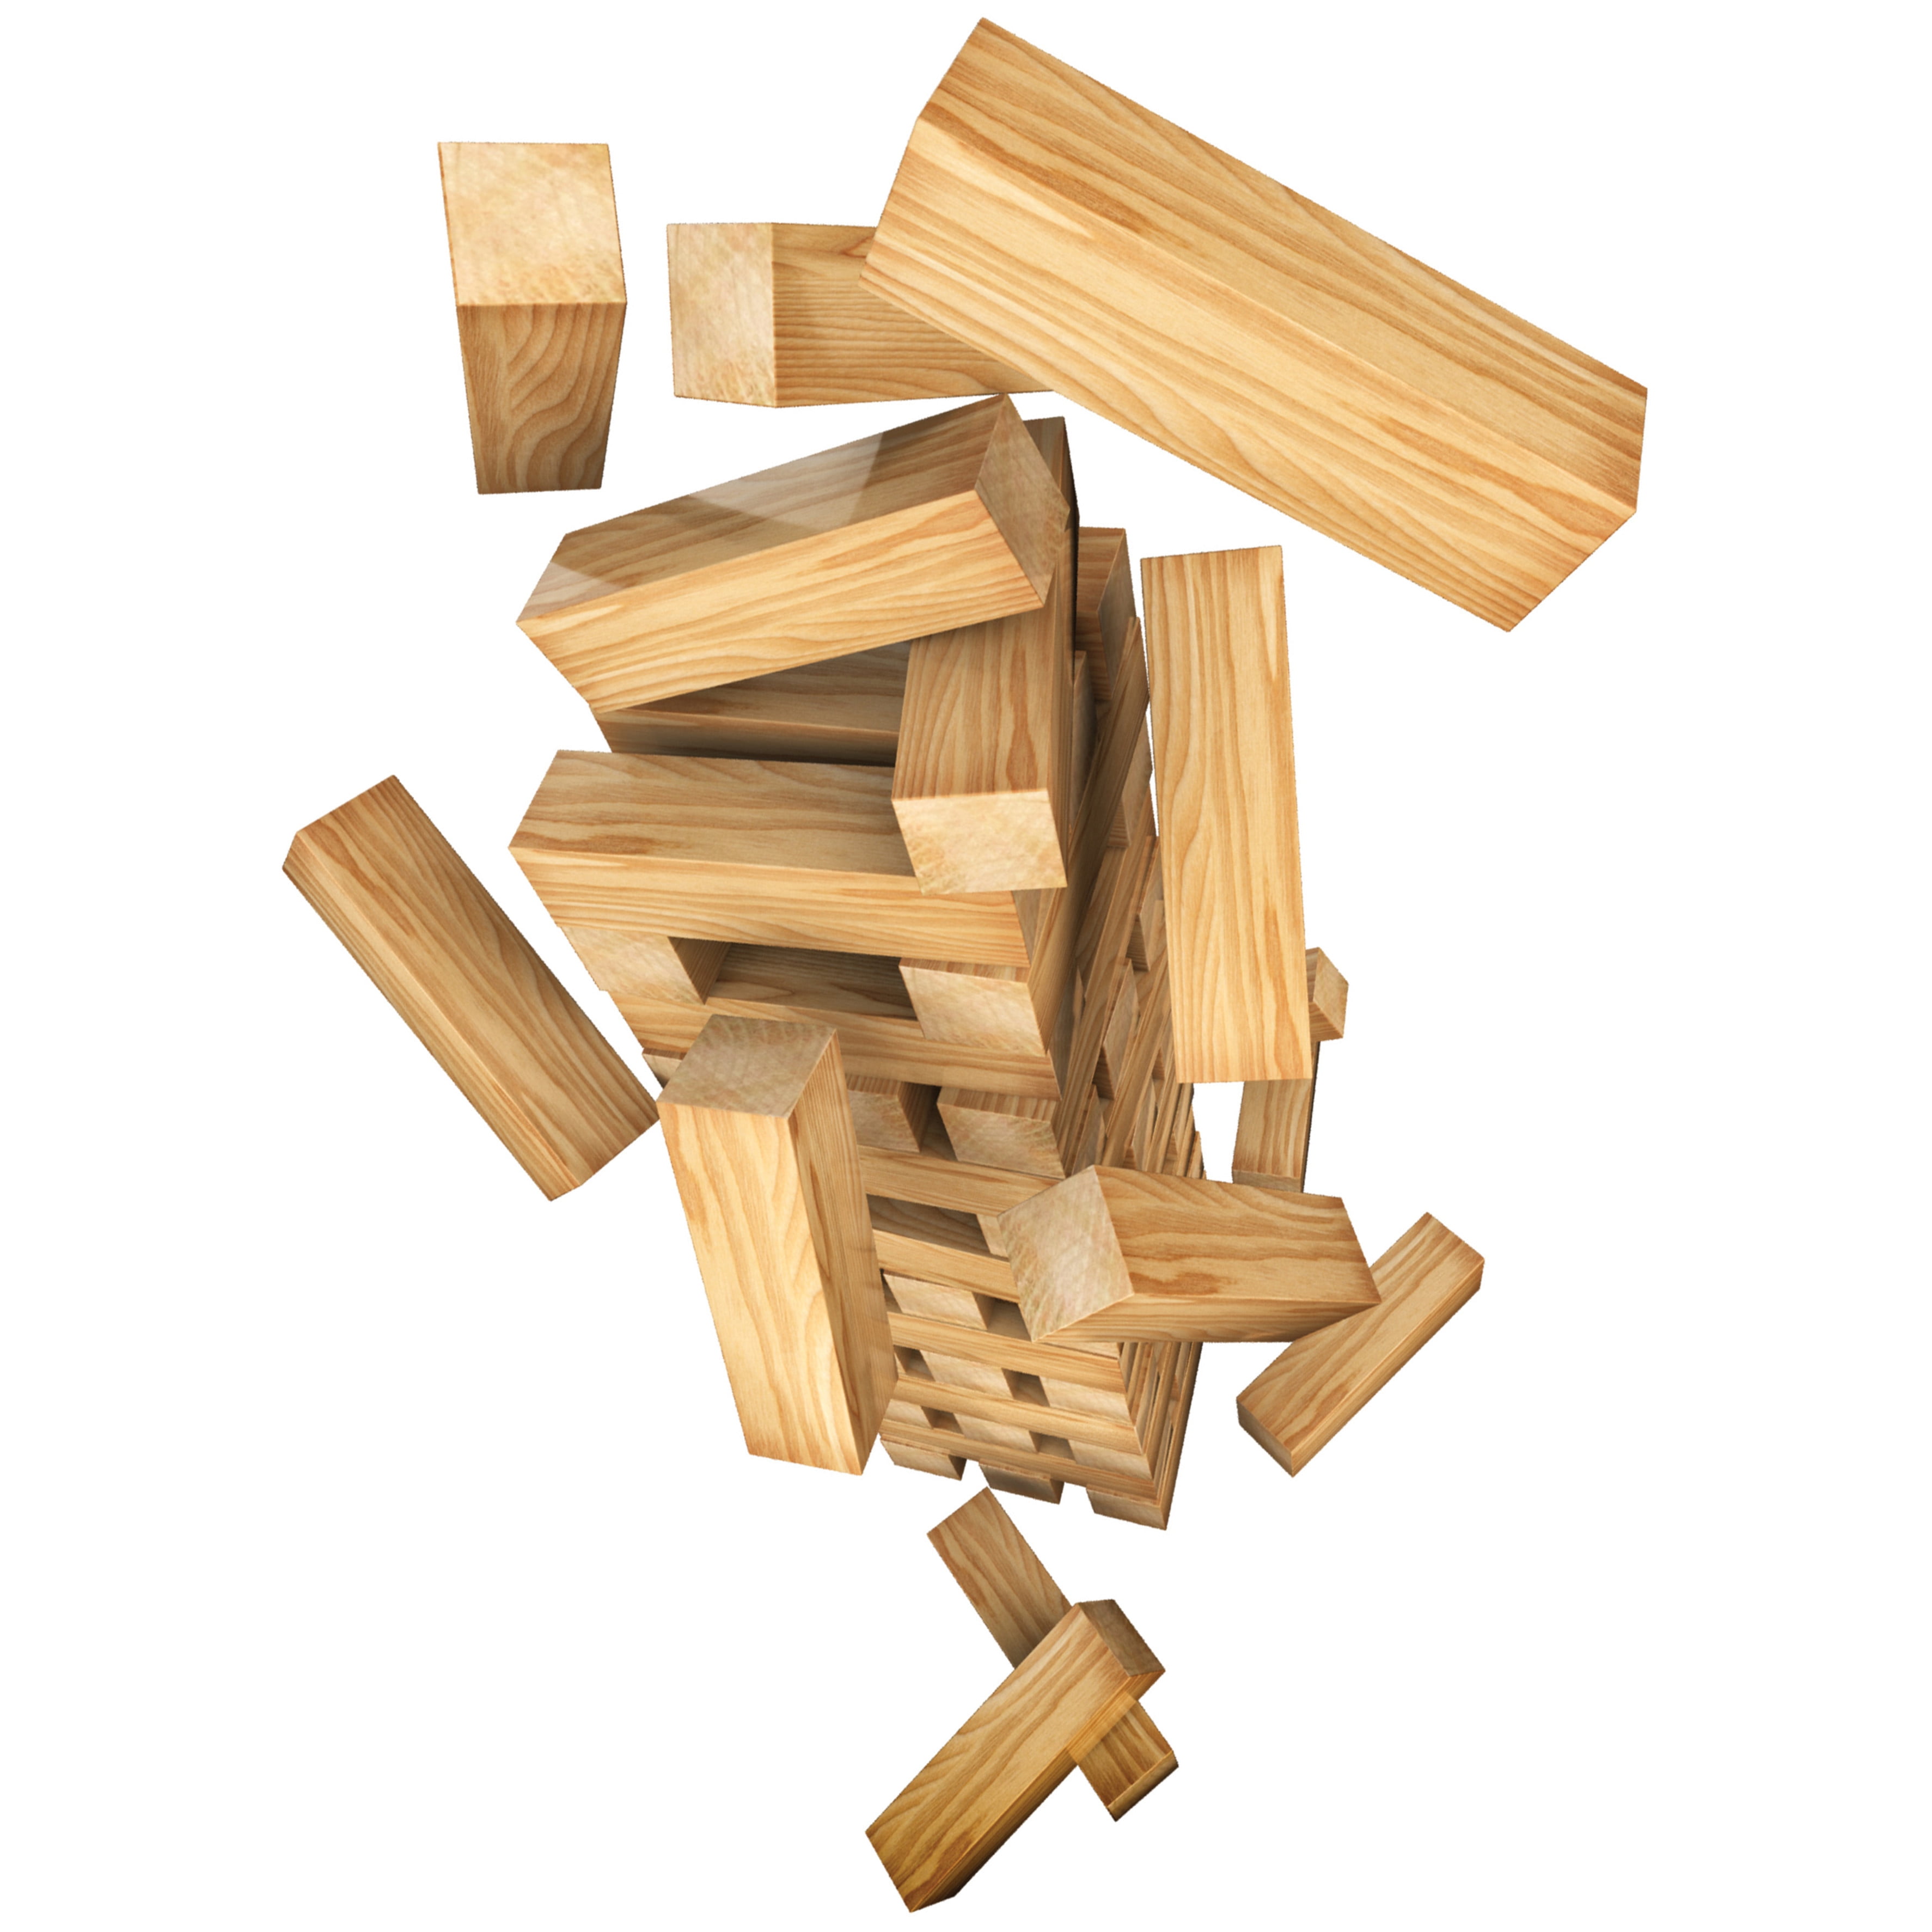 Timber Tower Wood Block Stacking Game - 48 Piece Guinea